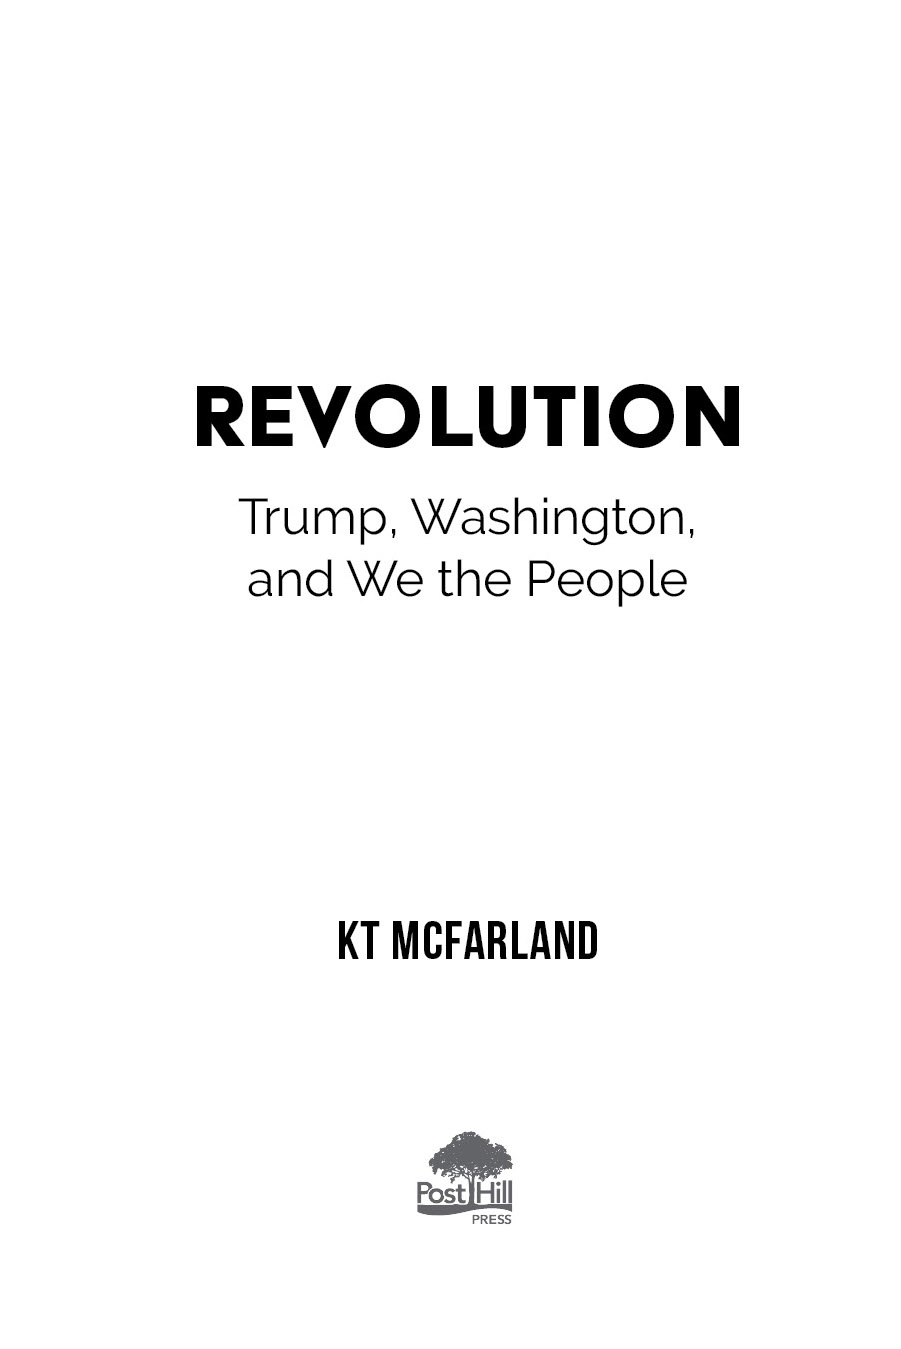 A POST HILL PRESS BOOK Revolution Trump Washington and We the People 2020 by - photo 3